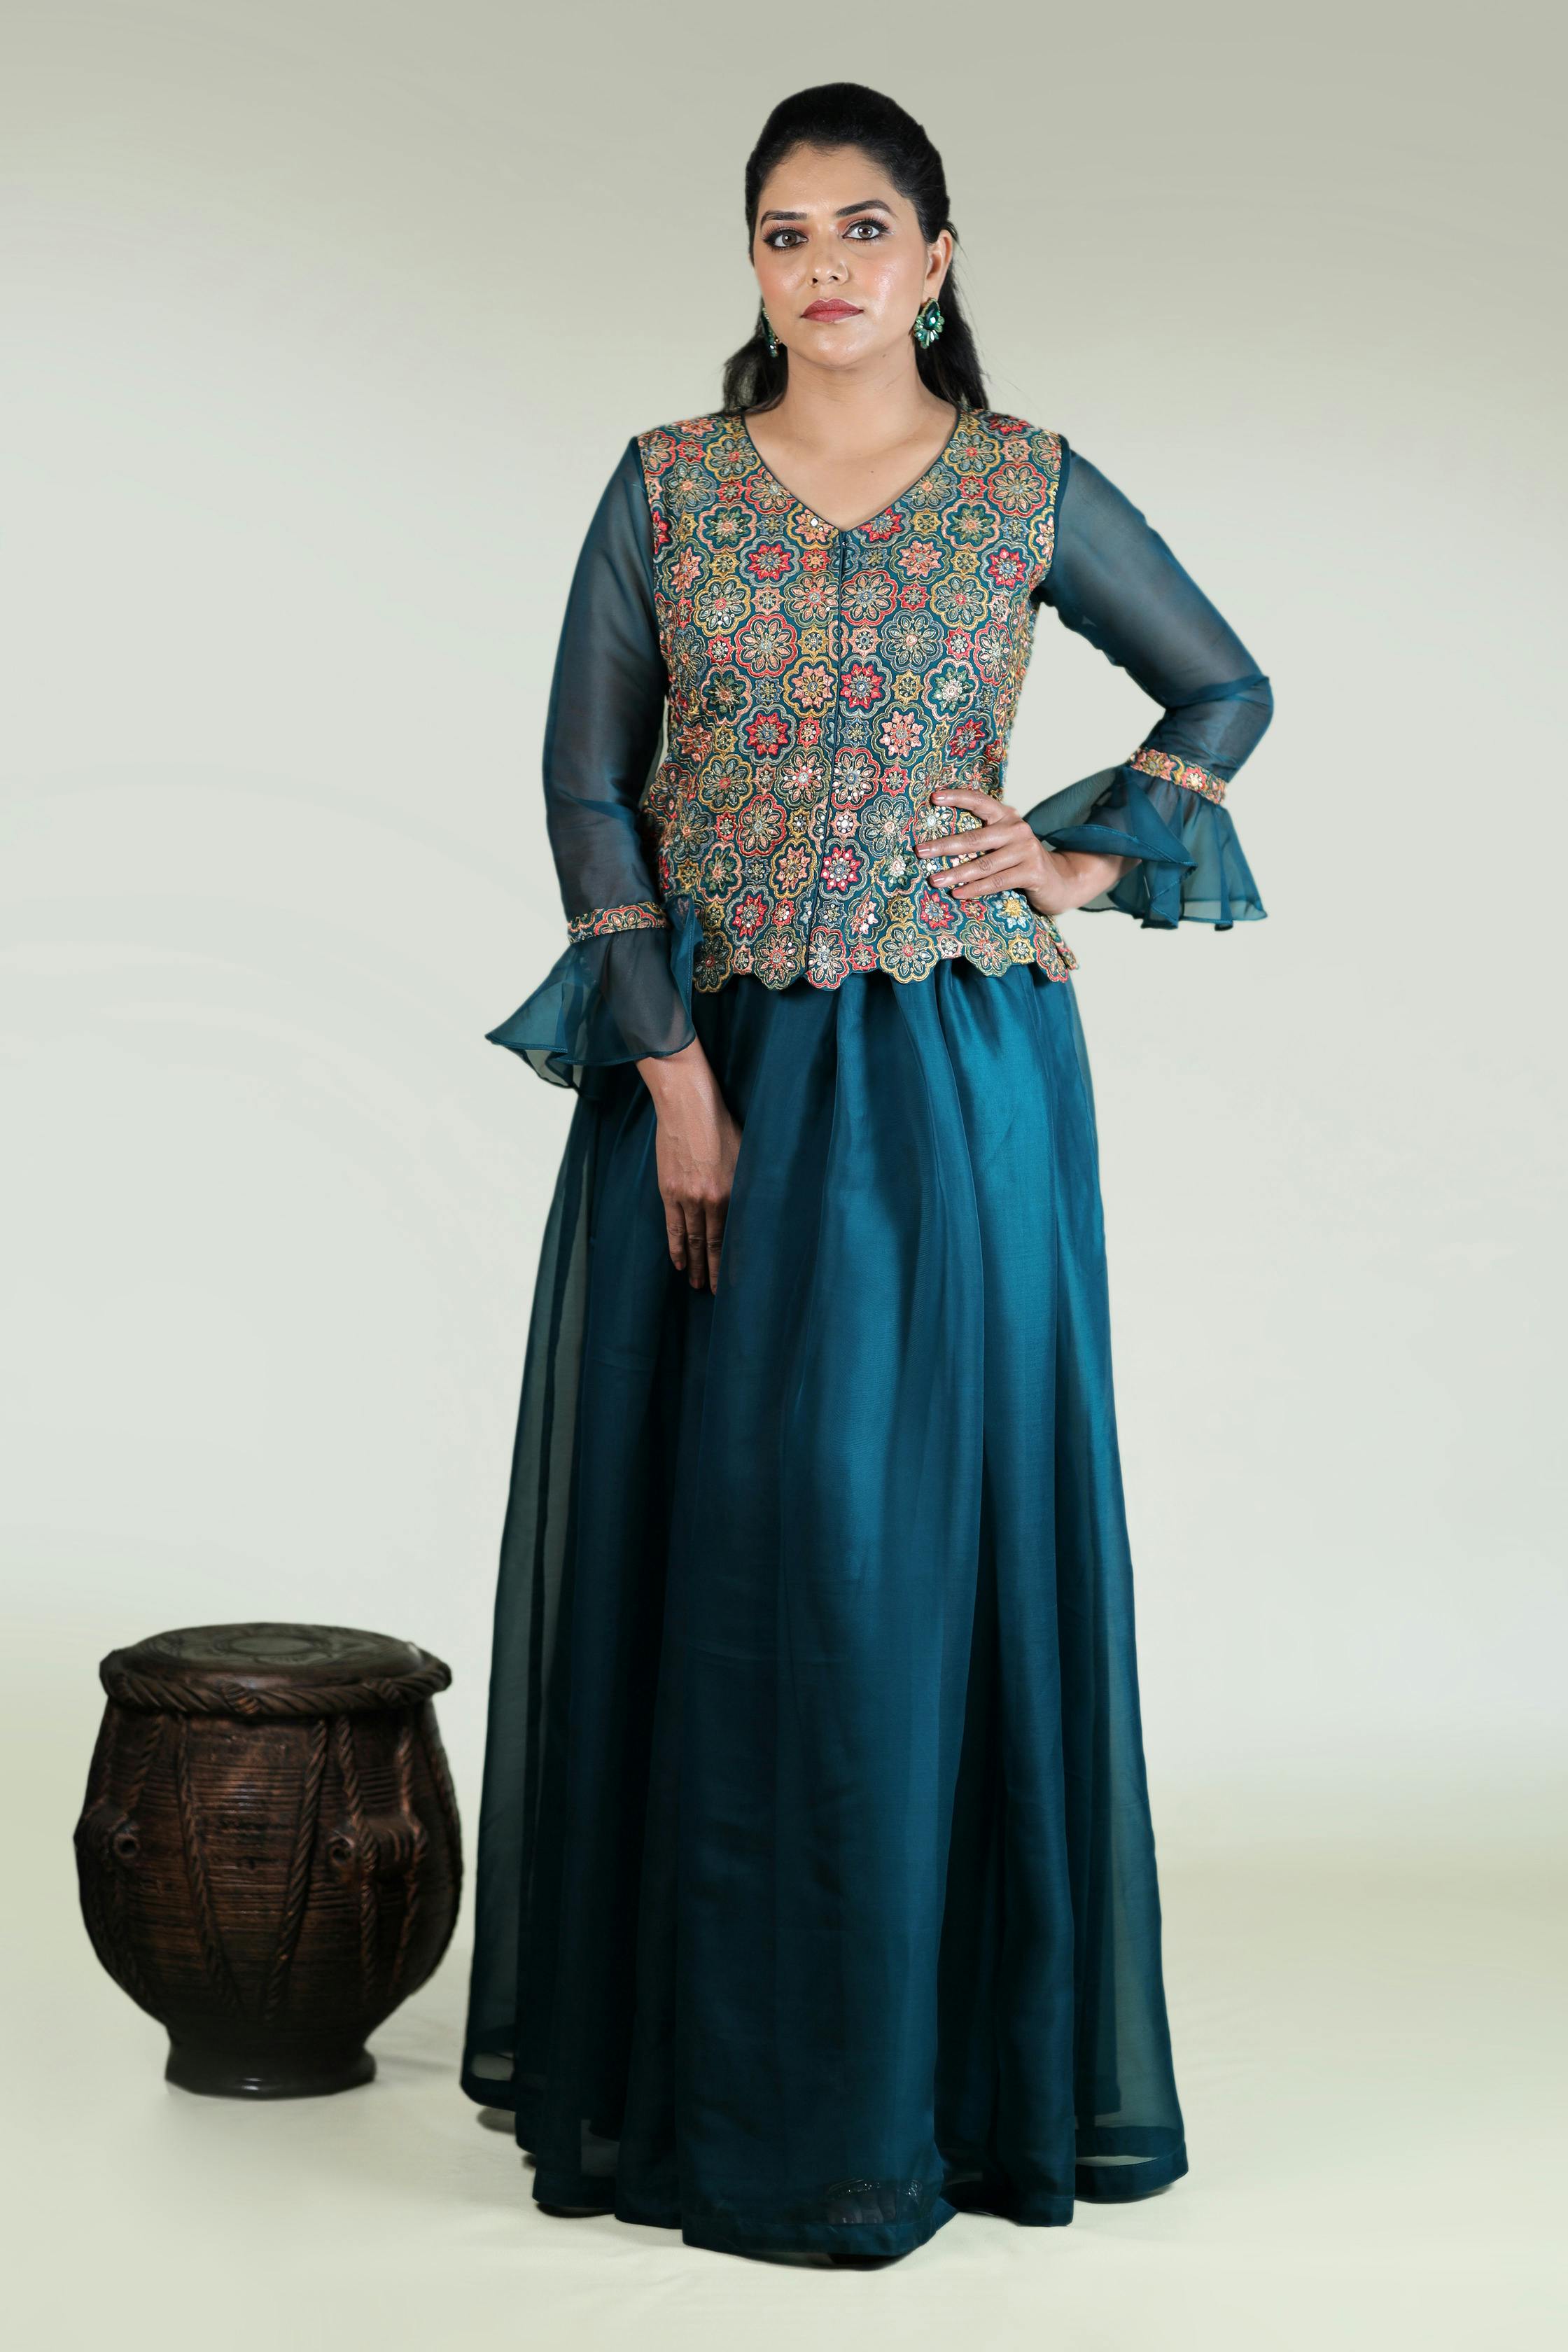 Bottle Green Paneled Skirt With Traditional Tunic Top